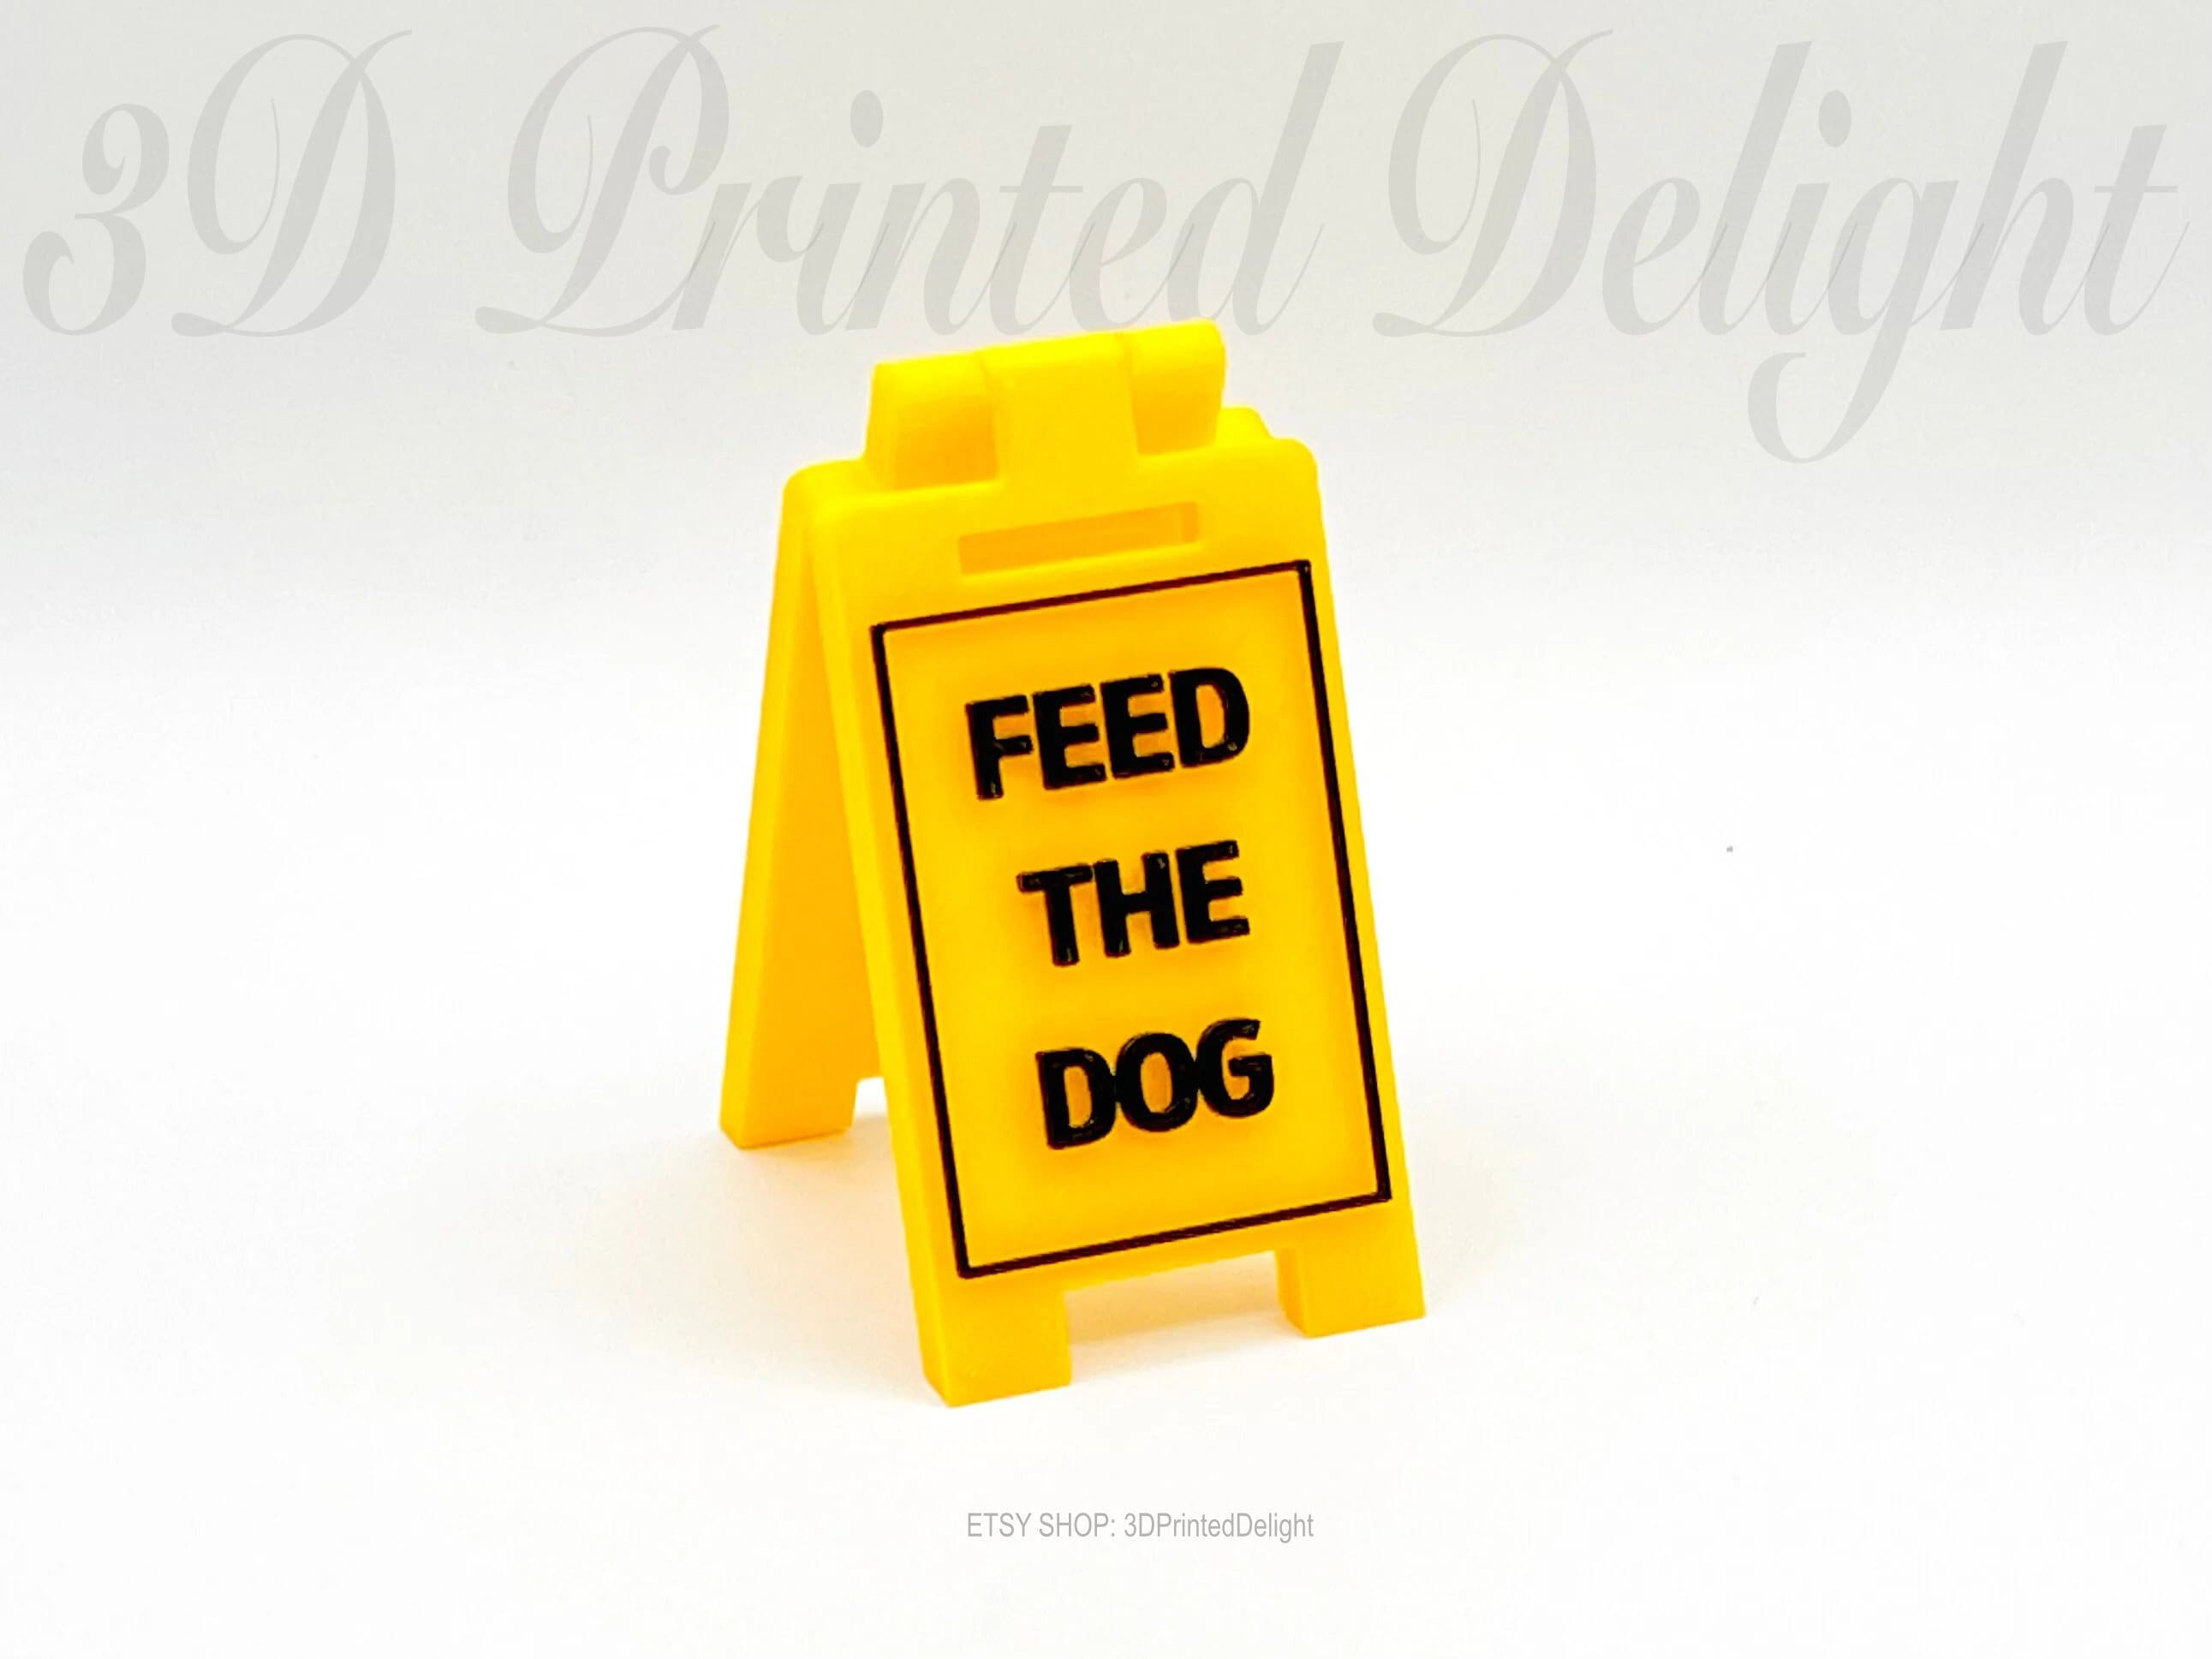 Did You Feed The Dog? A Magnetic Whiteboard Reminder - Pawsify